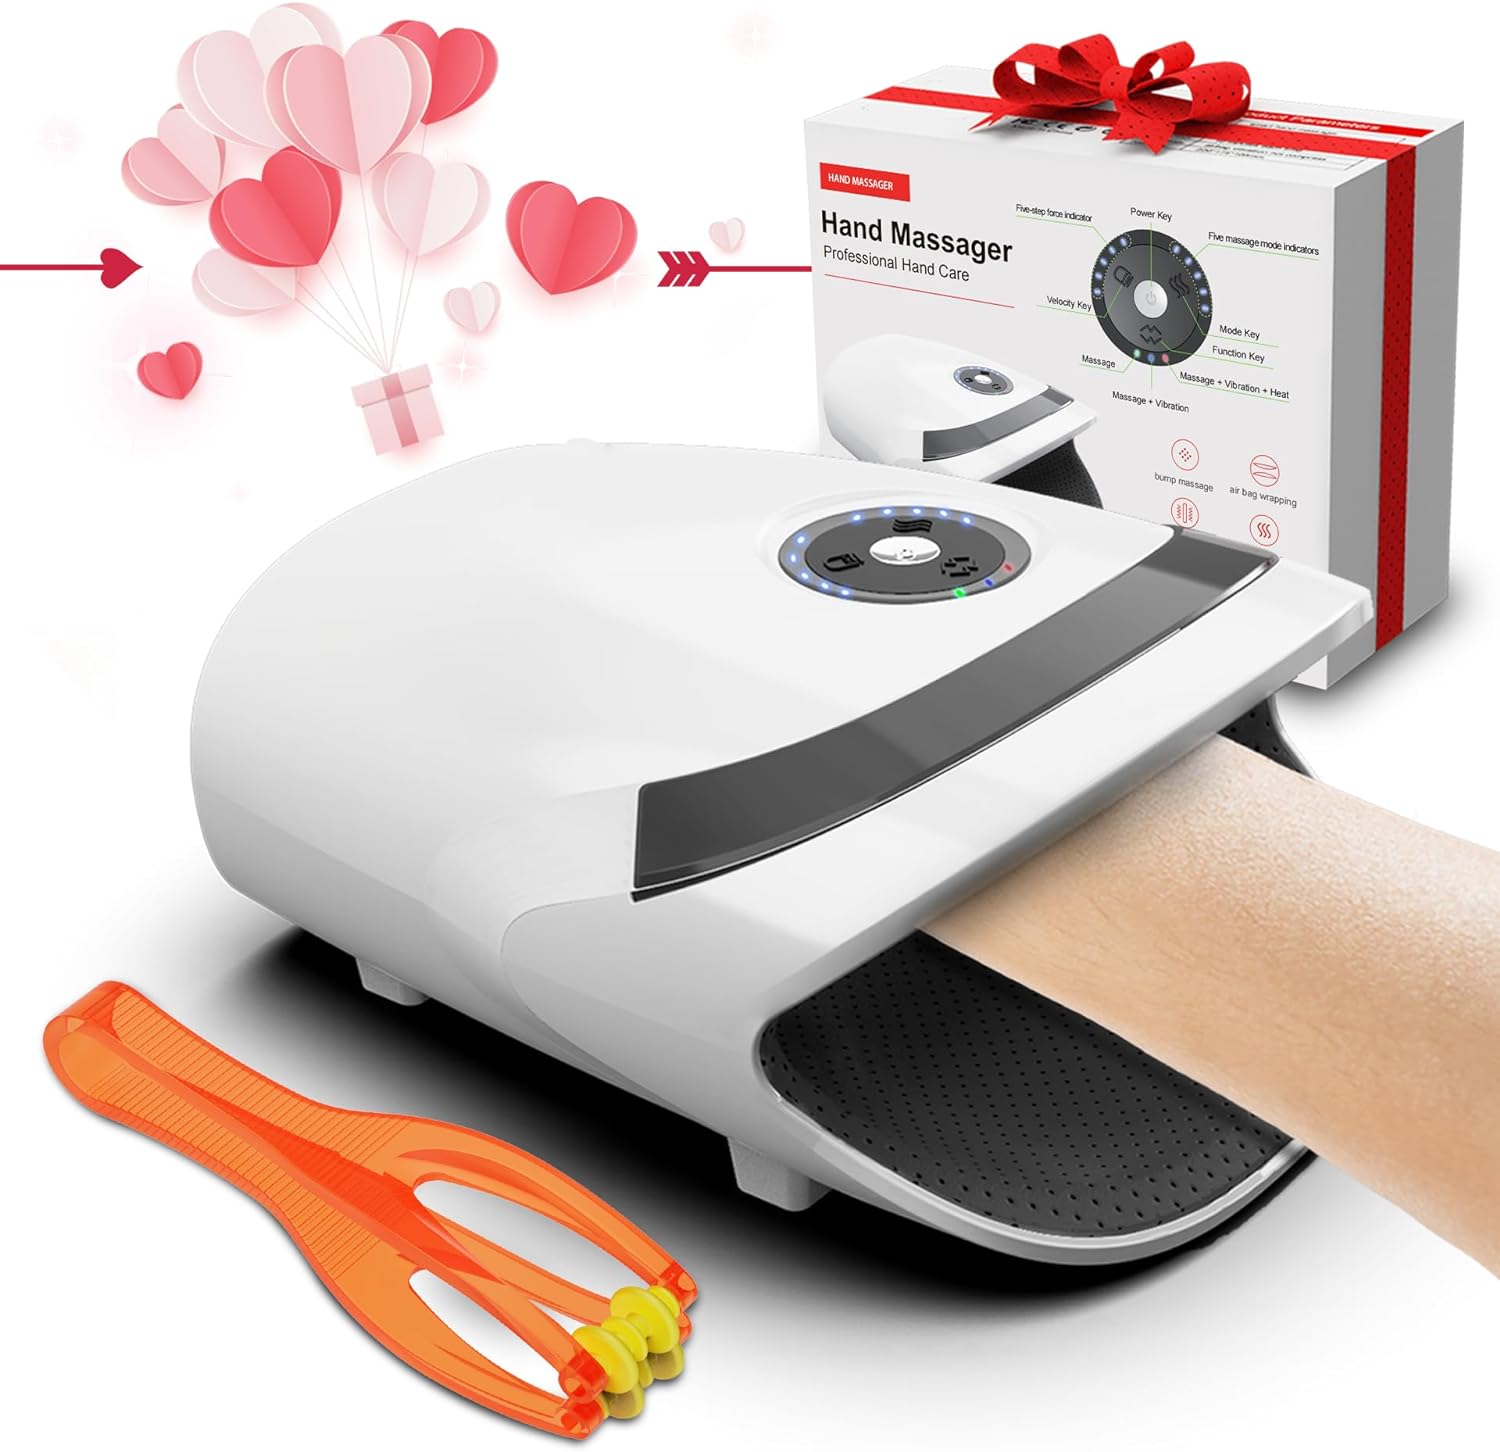 Discover Exciting Discounts on Xllent Christmas Gifts for Women/Men Hand Massager